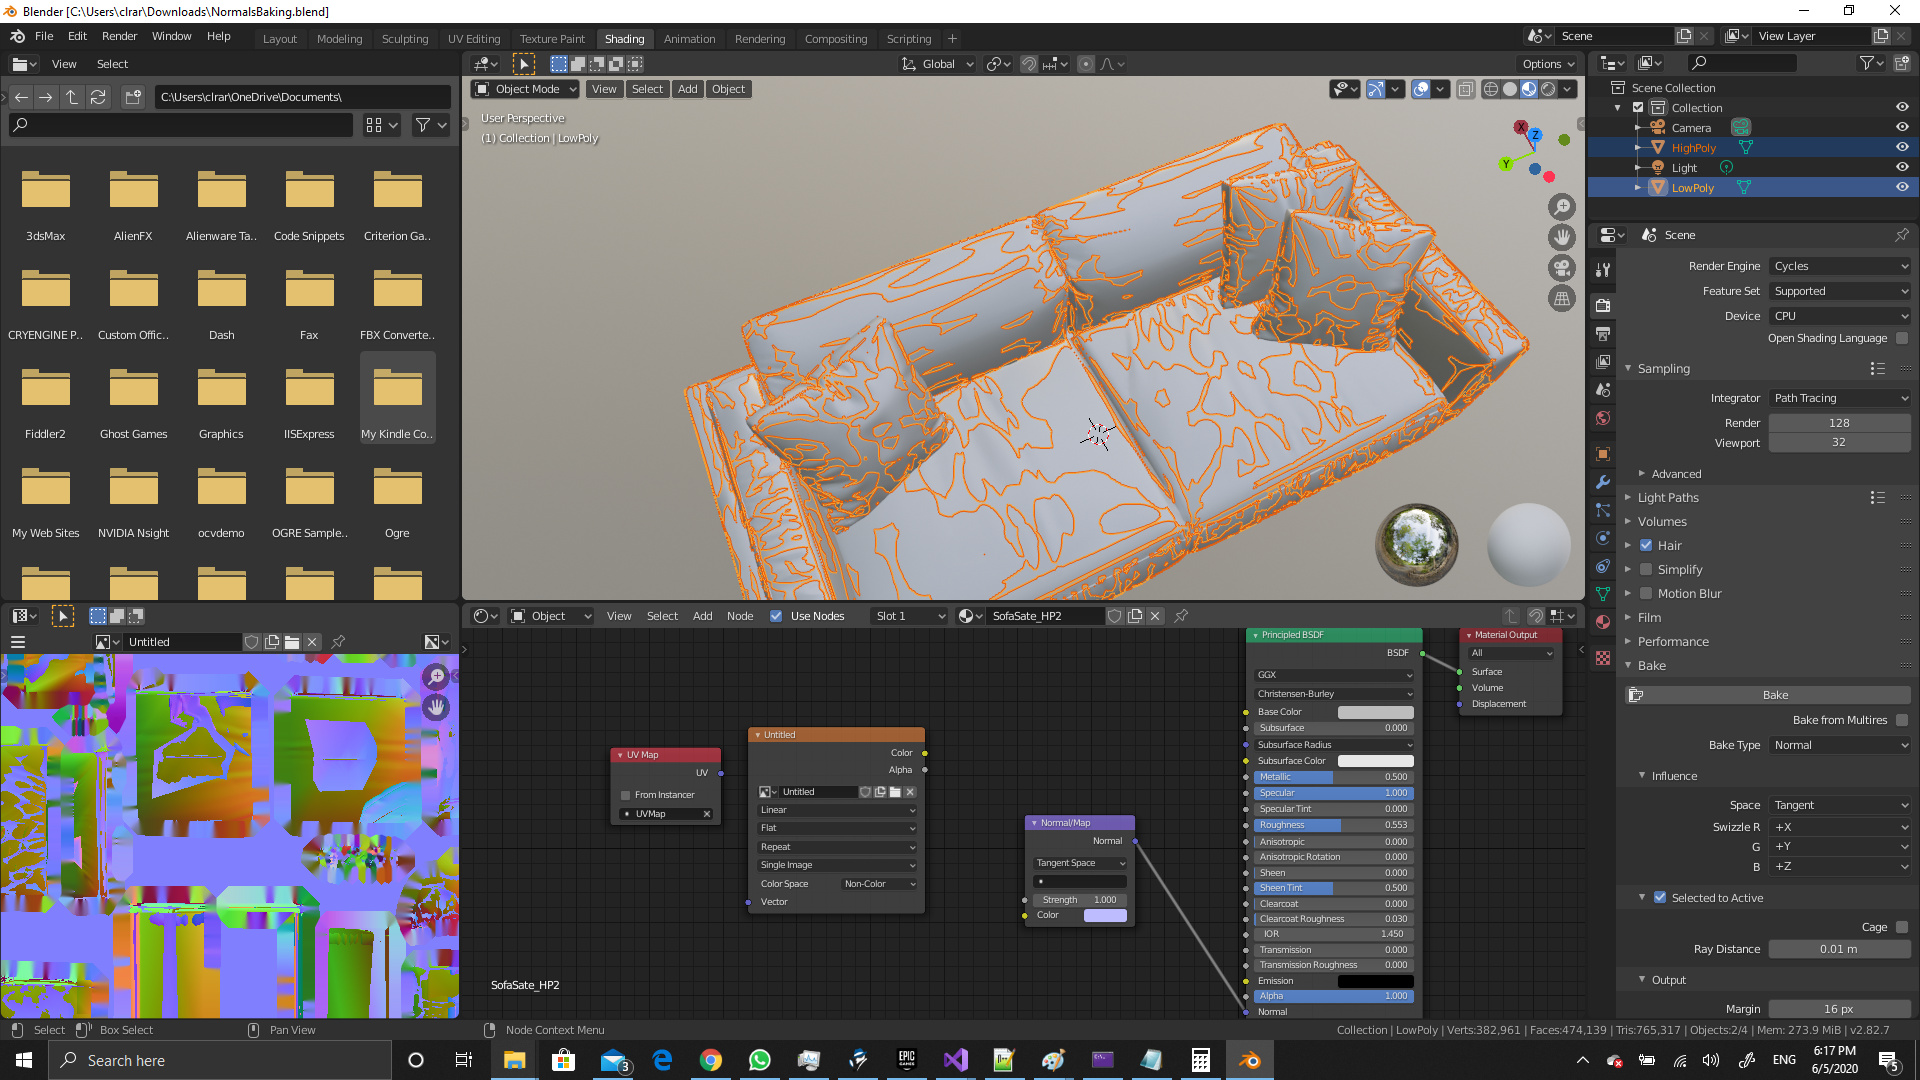 Issue baking normal map with High and Low poly. Please help - Archive -  Developer Forum